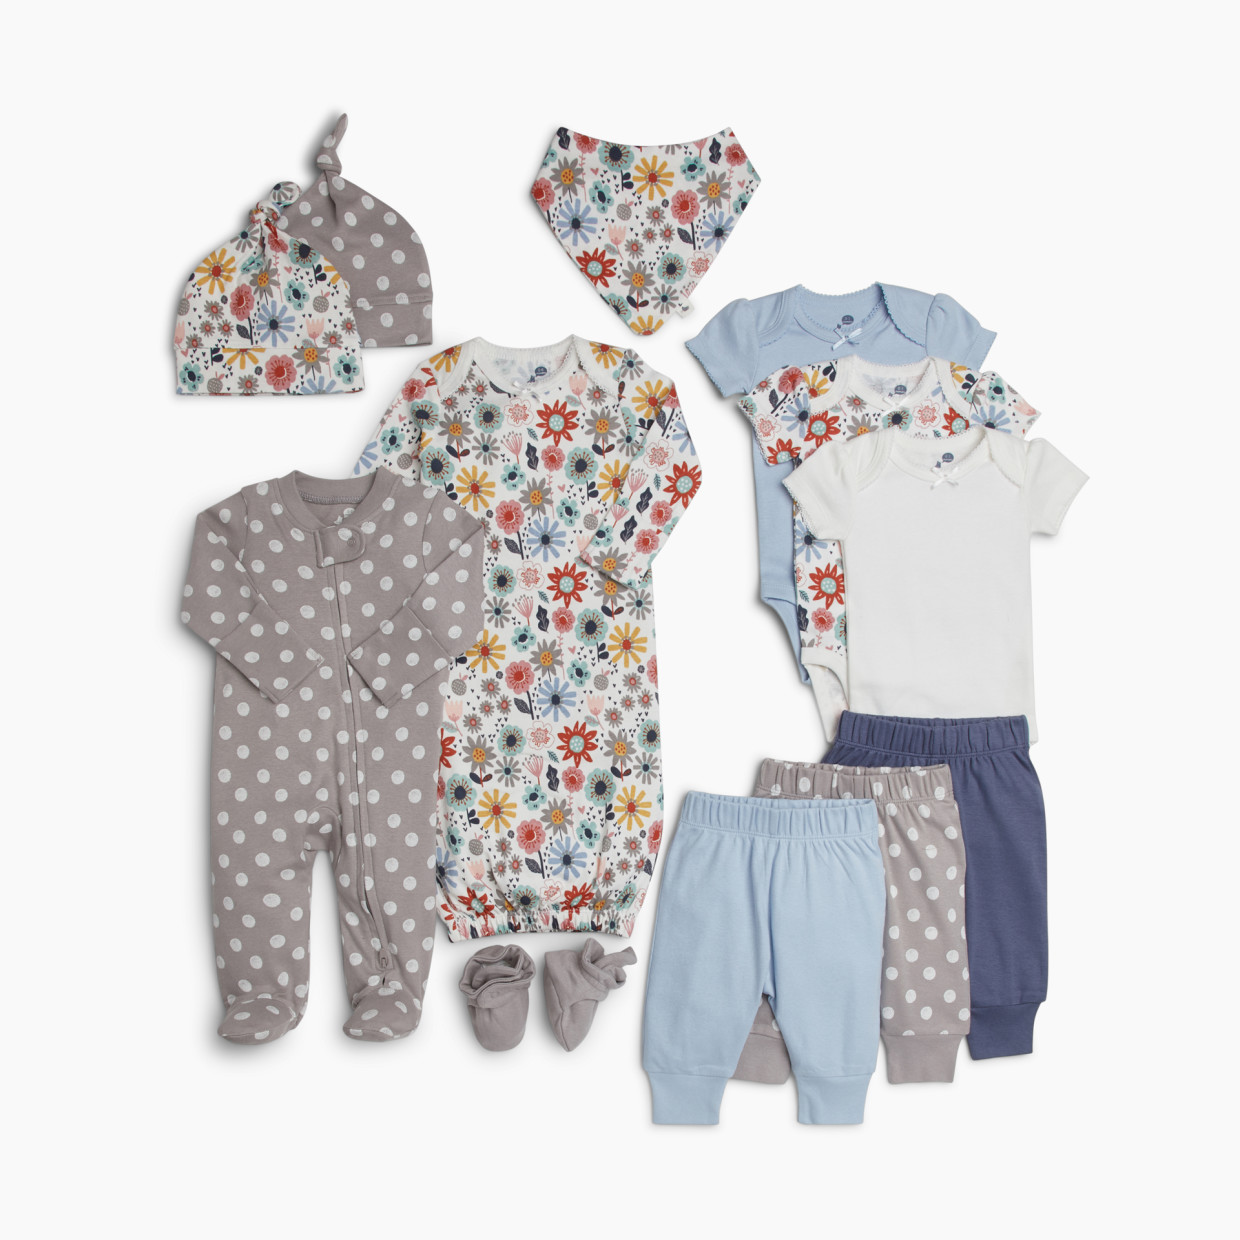 Small Story 12-Piece Essentials Layette Set - Dusty Floral, 0-3 M.